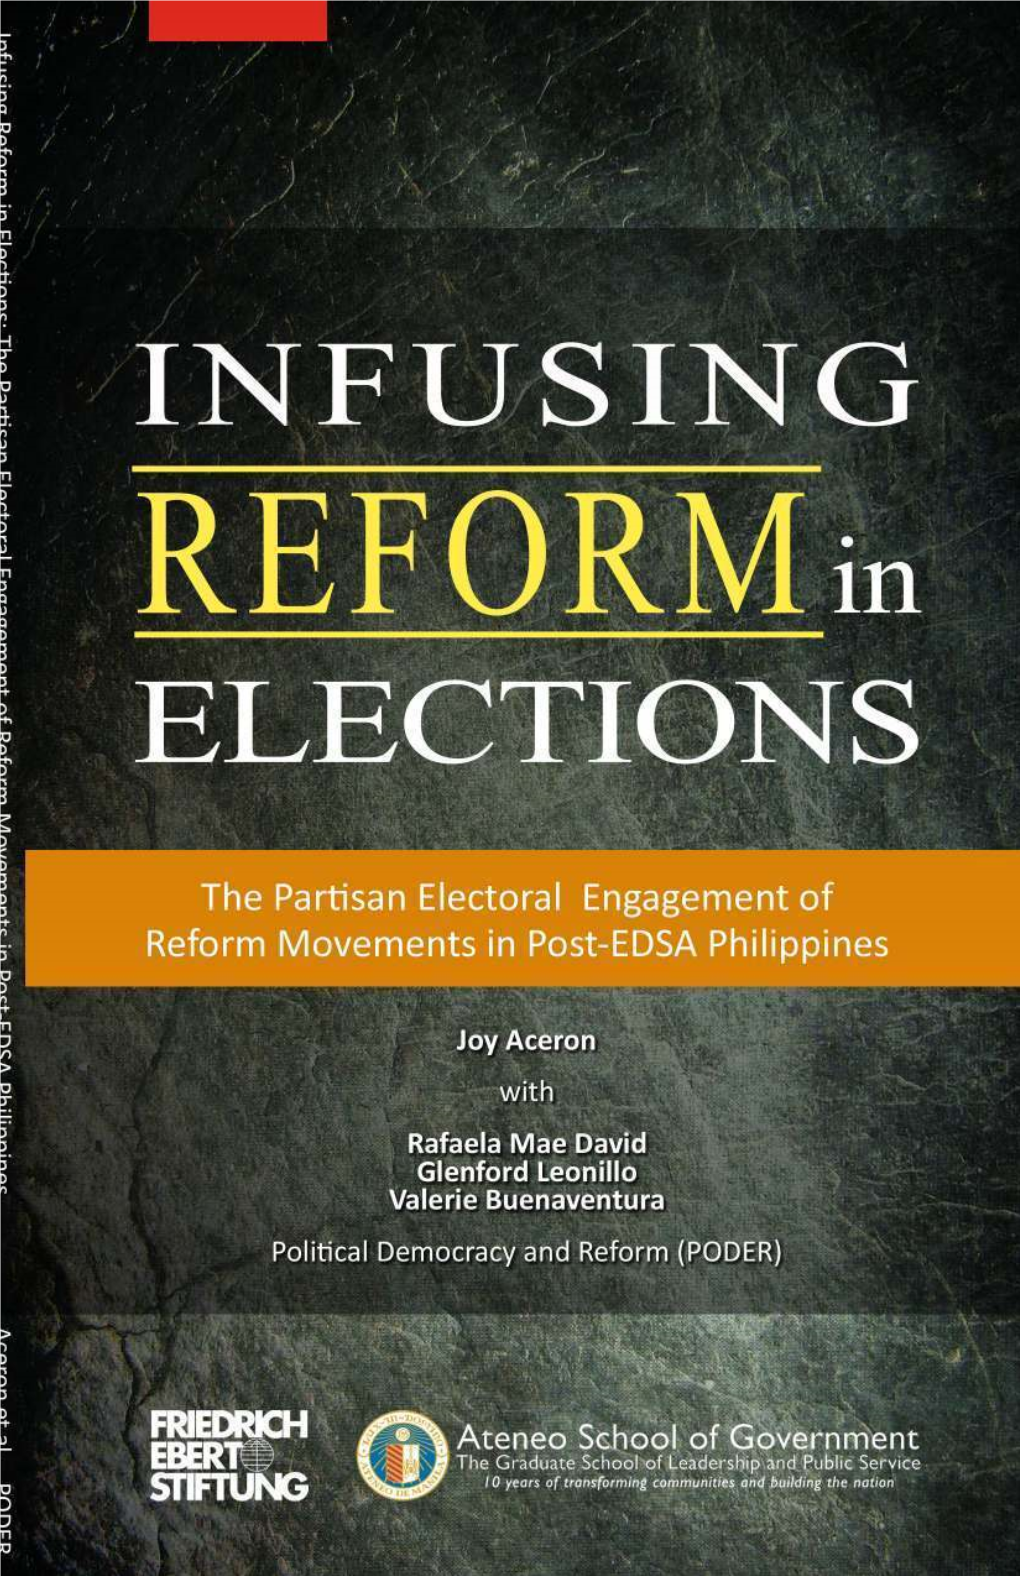 Infusing Reform in Elections